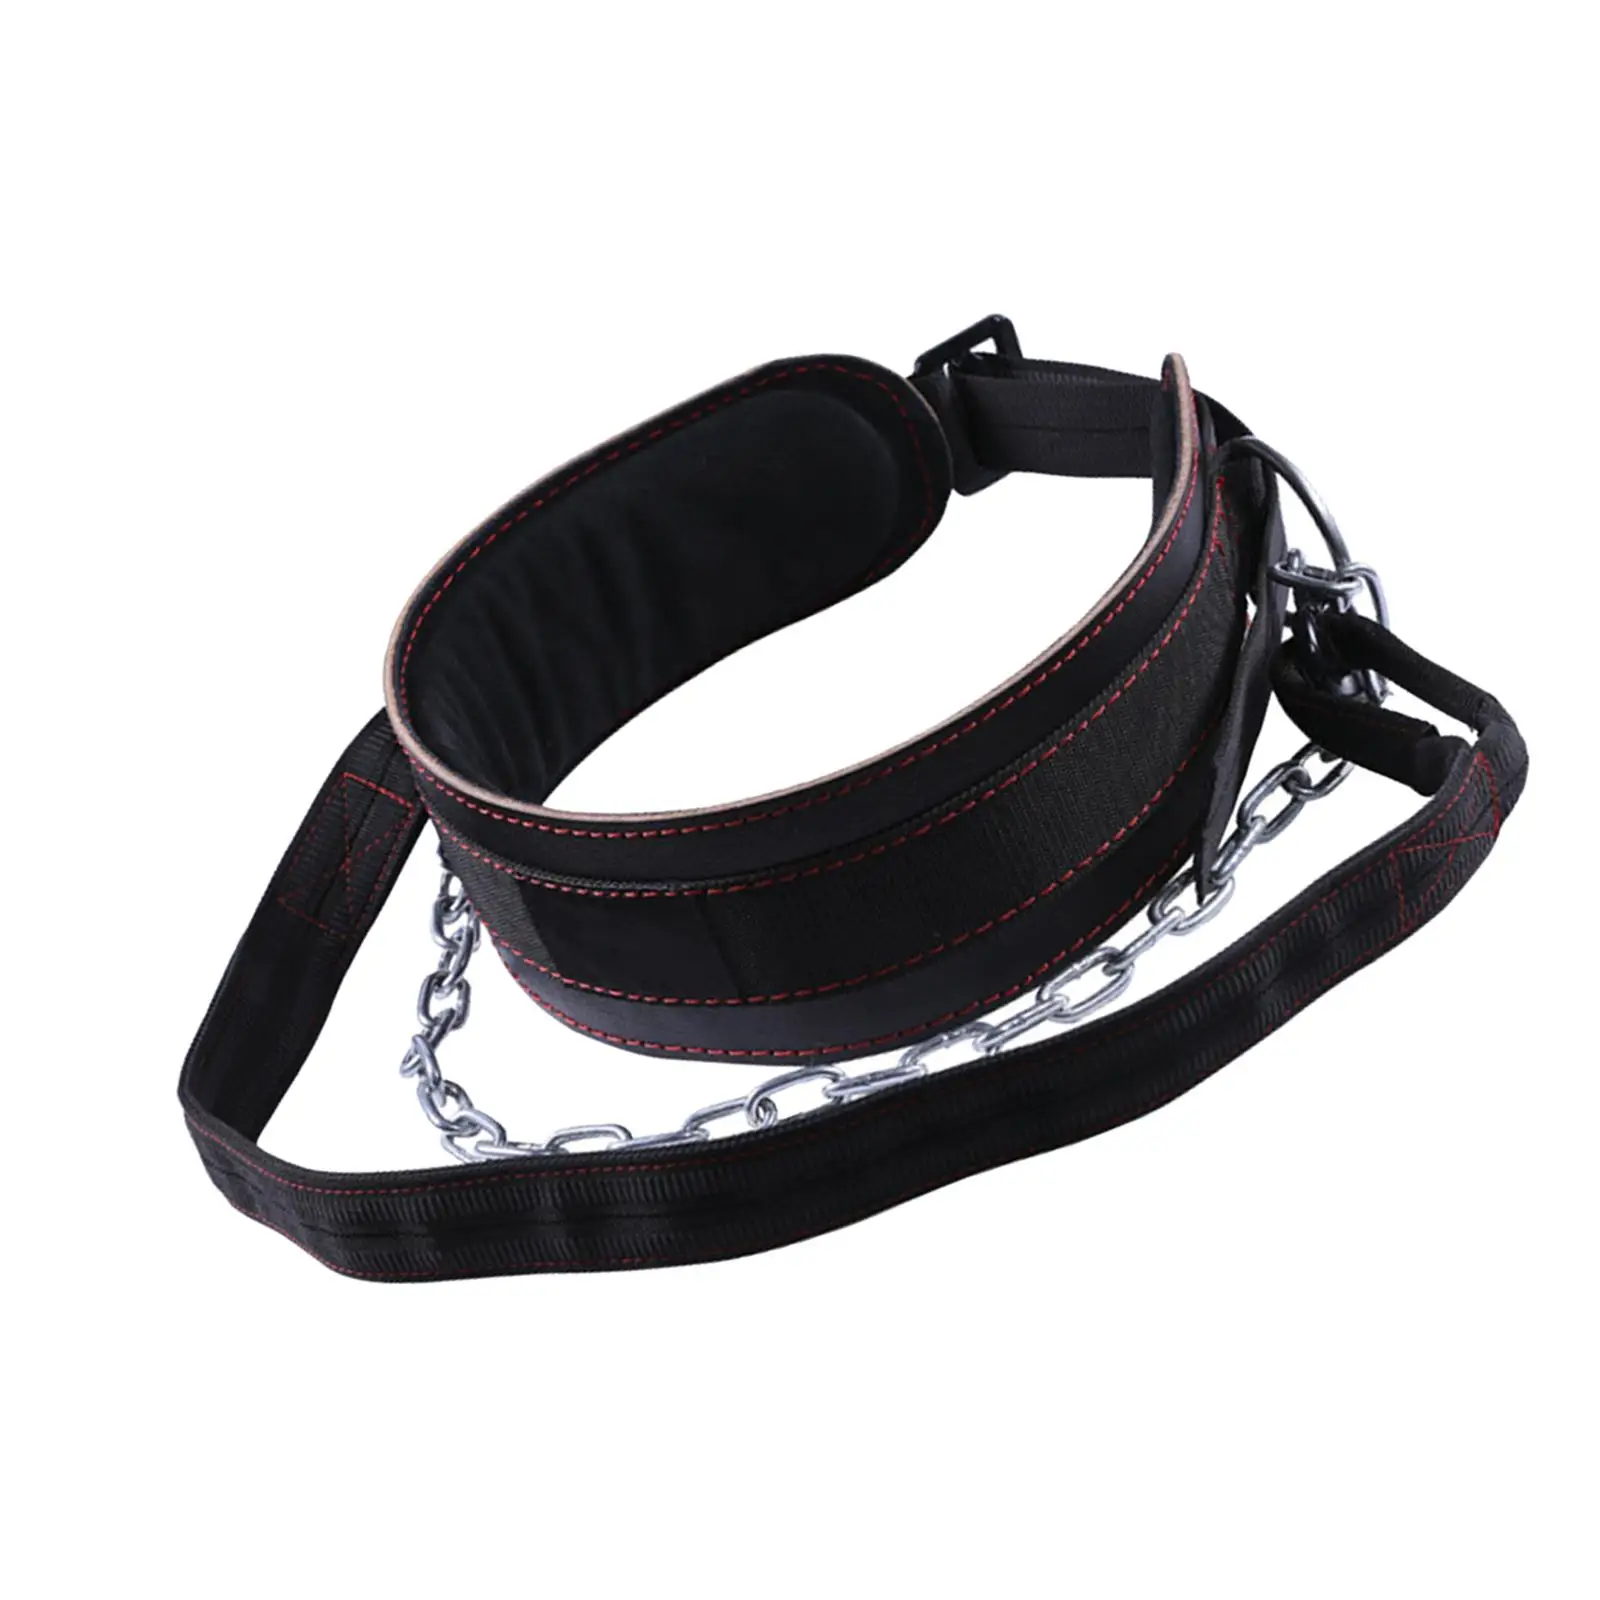 Fitness Weight Lifting Belt with Metal Chain Professional Trainer Weight Belt Lifting Belt for Power Lifting Strength Training